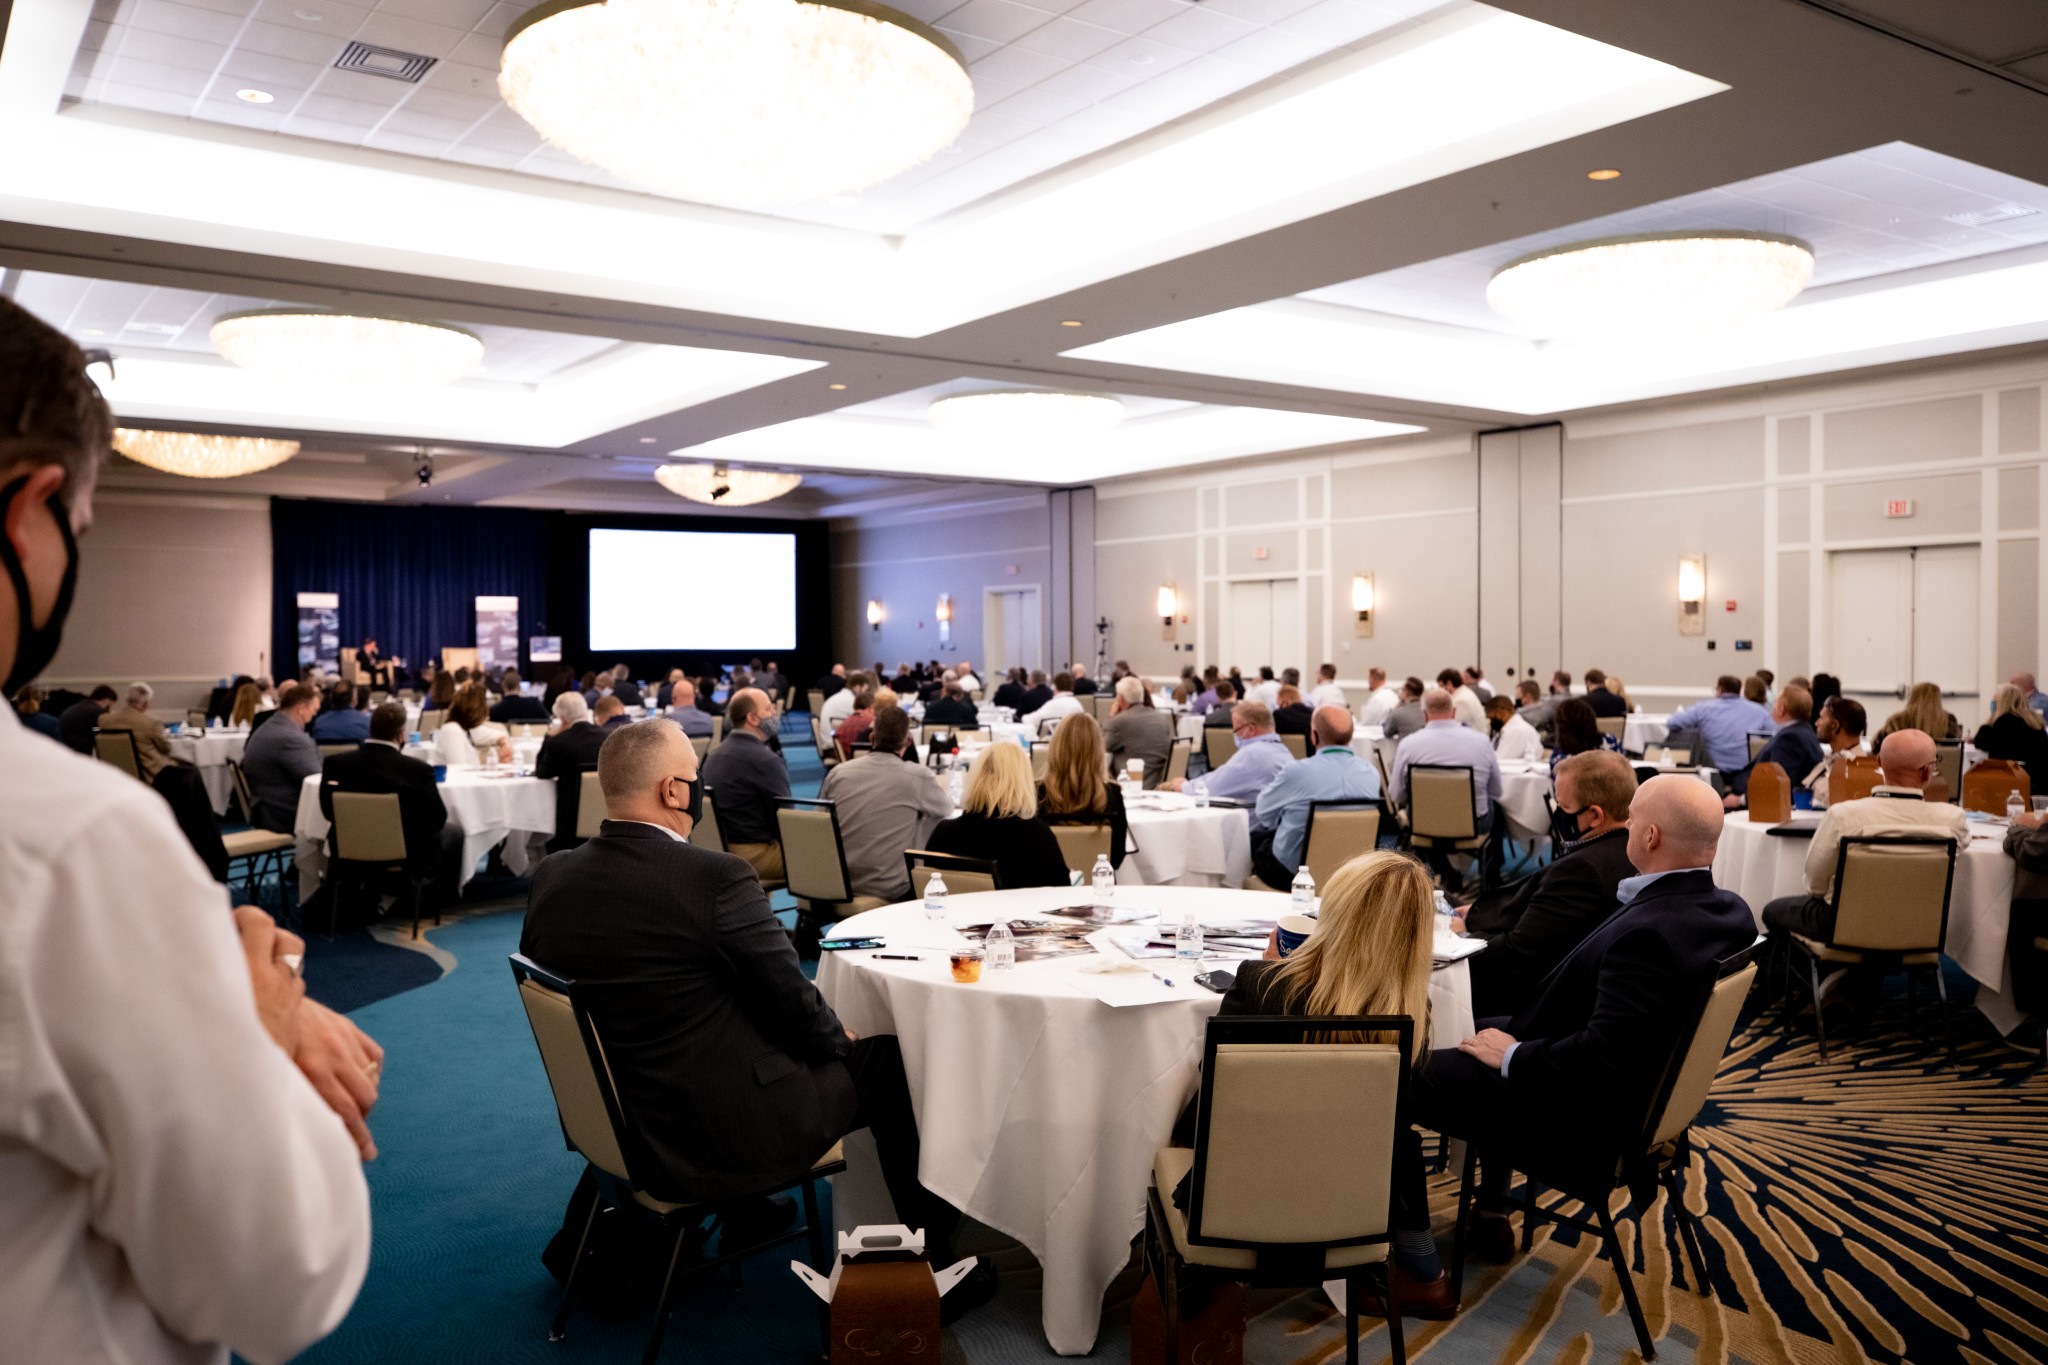 The Air Force Contracting Summit included nearly 700 inperson and